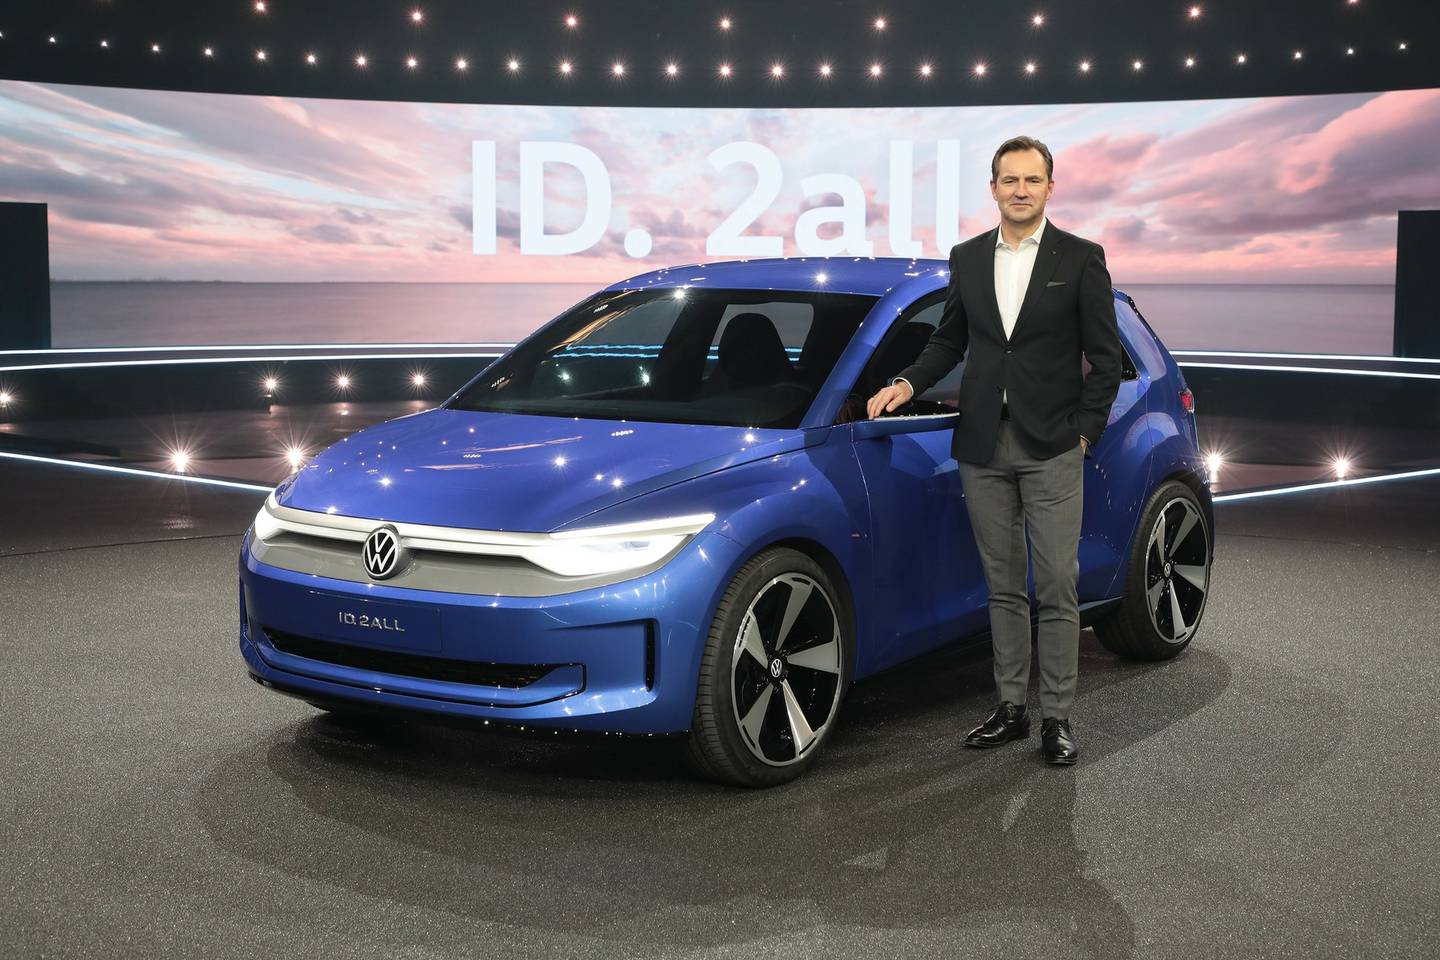 Thomas Schäfer, CEO Volkswagen Brand, and the new showcar ID. 2all.